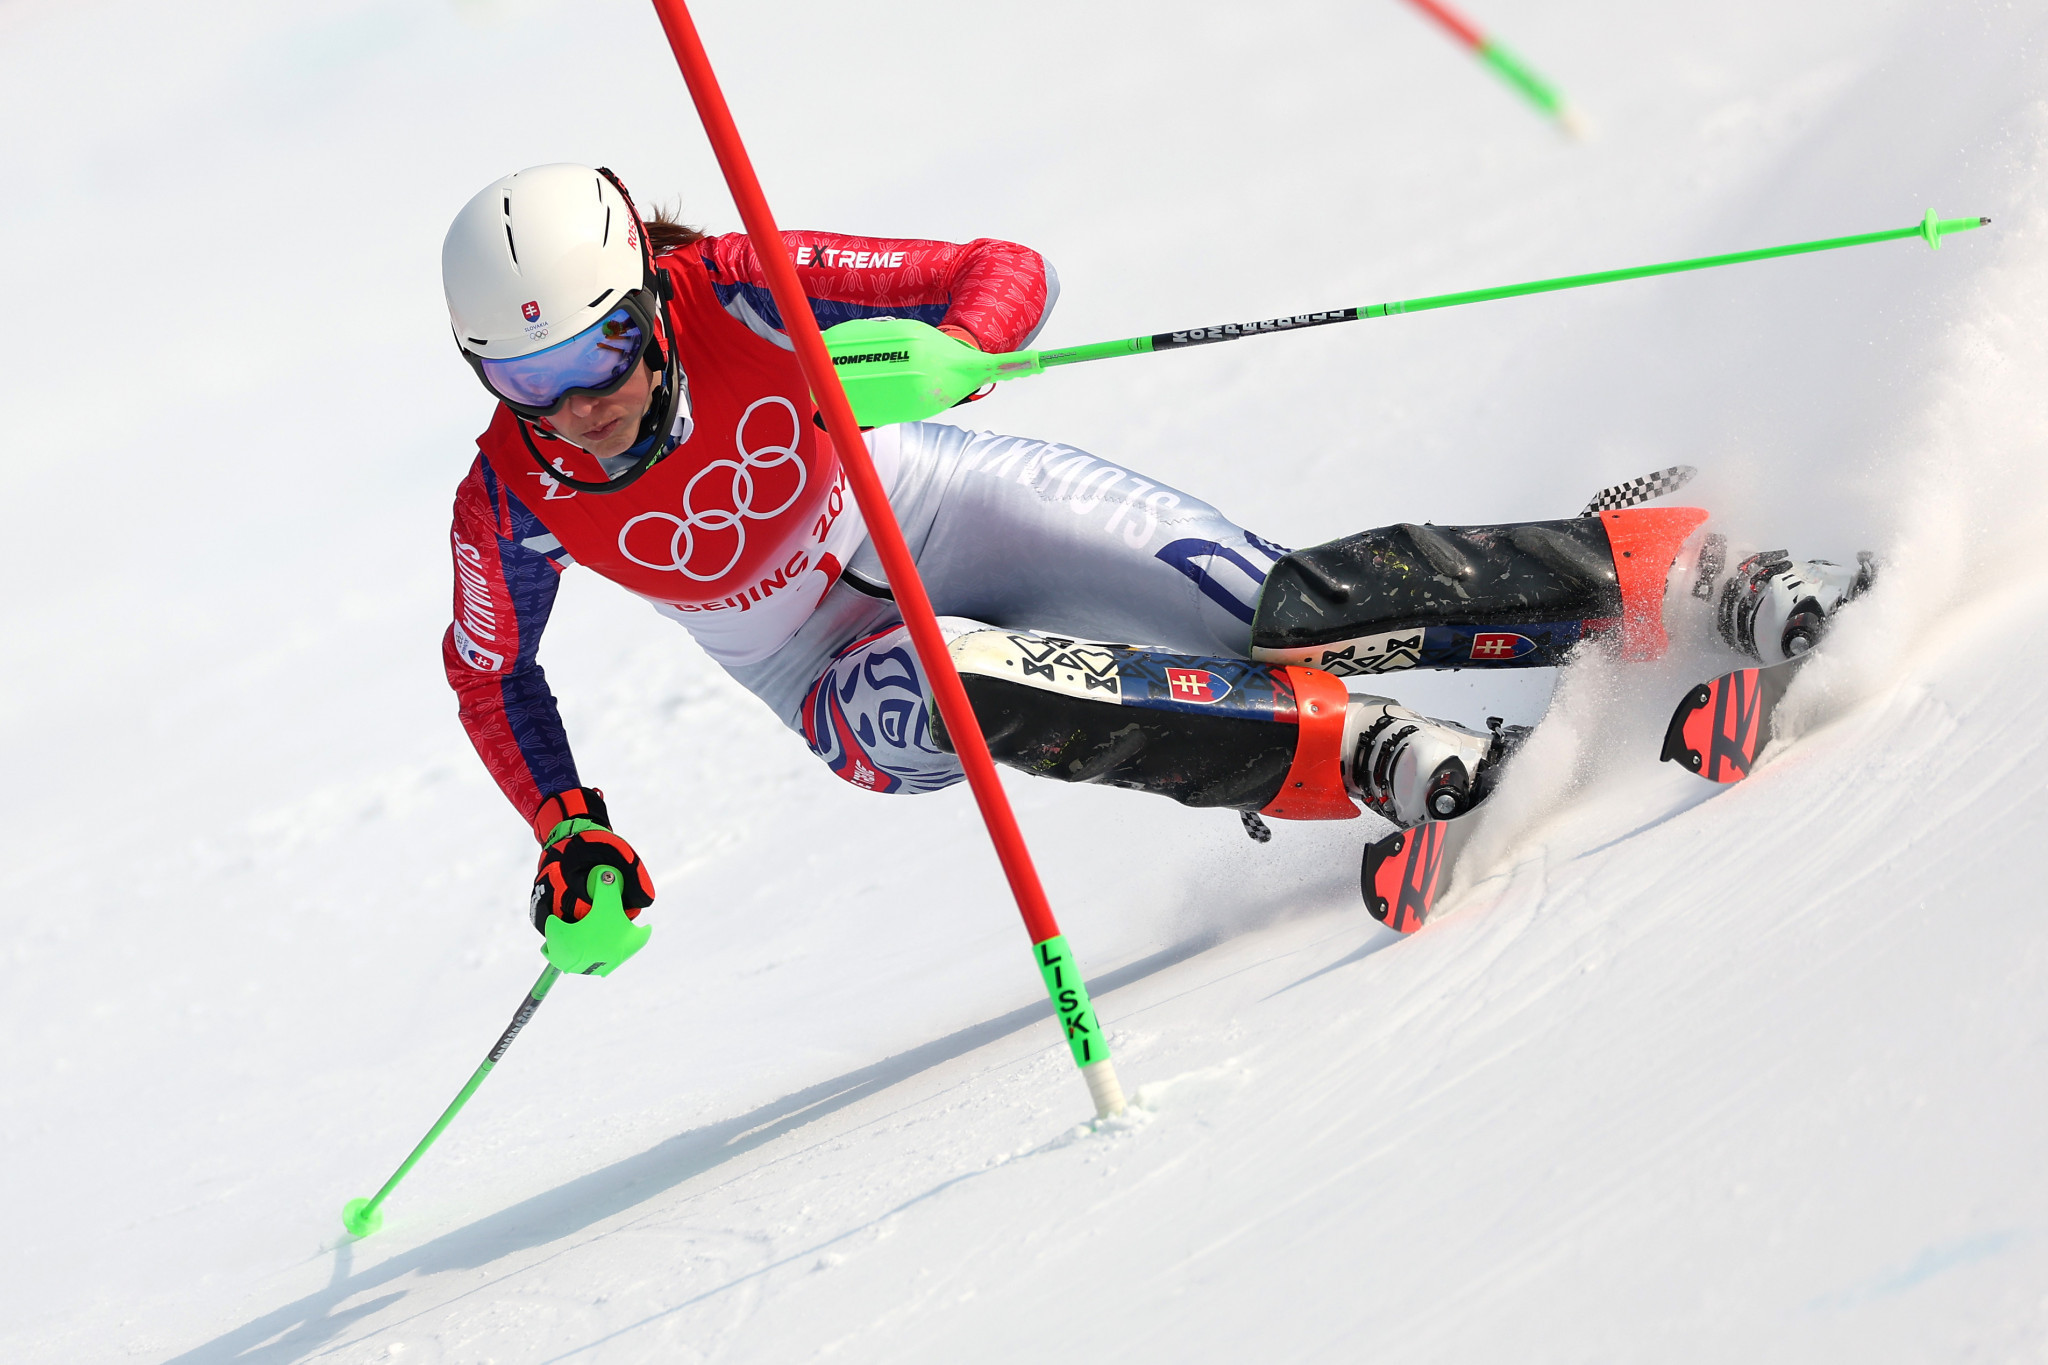 Petra Vlhová is the new Olympic slalom champion ©Getty Images